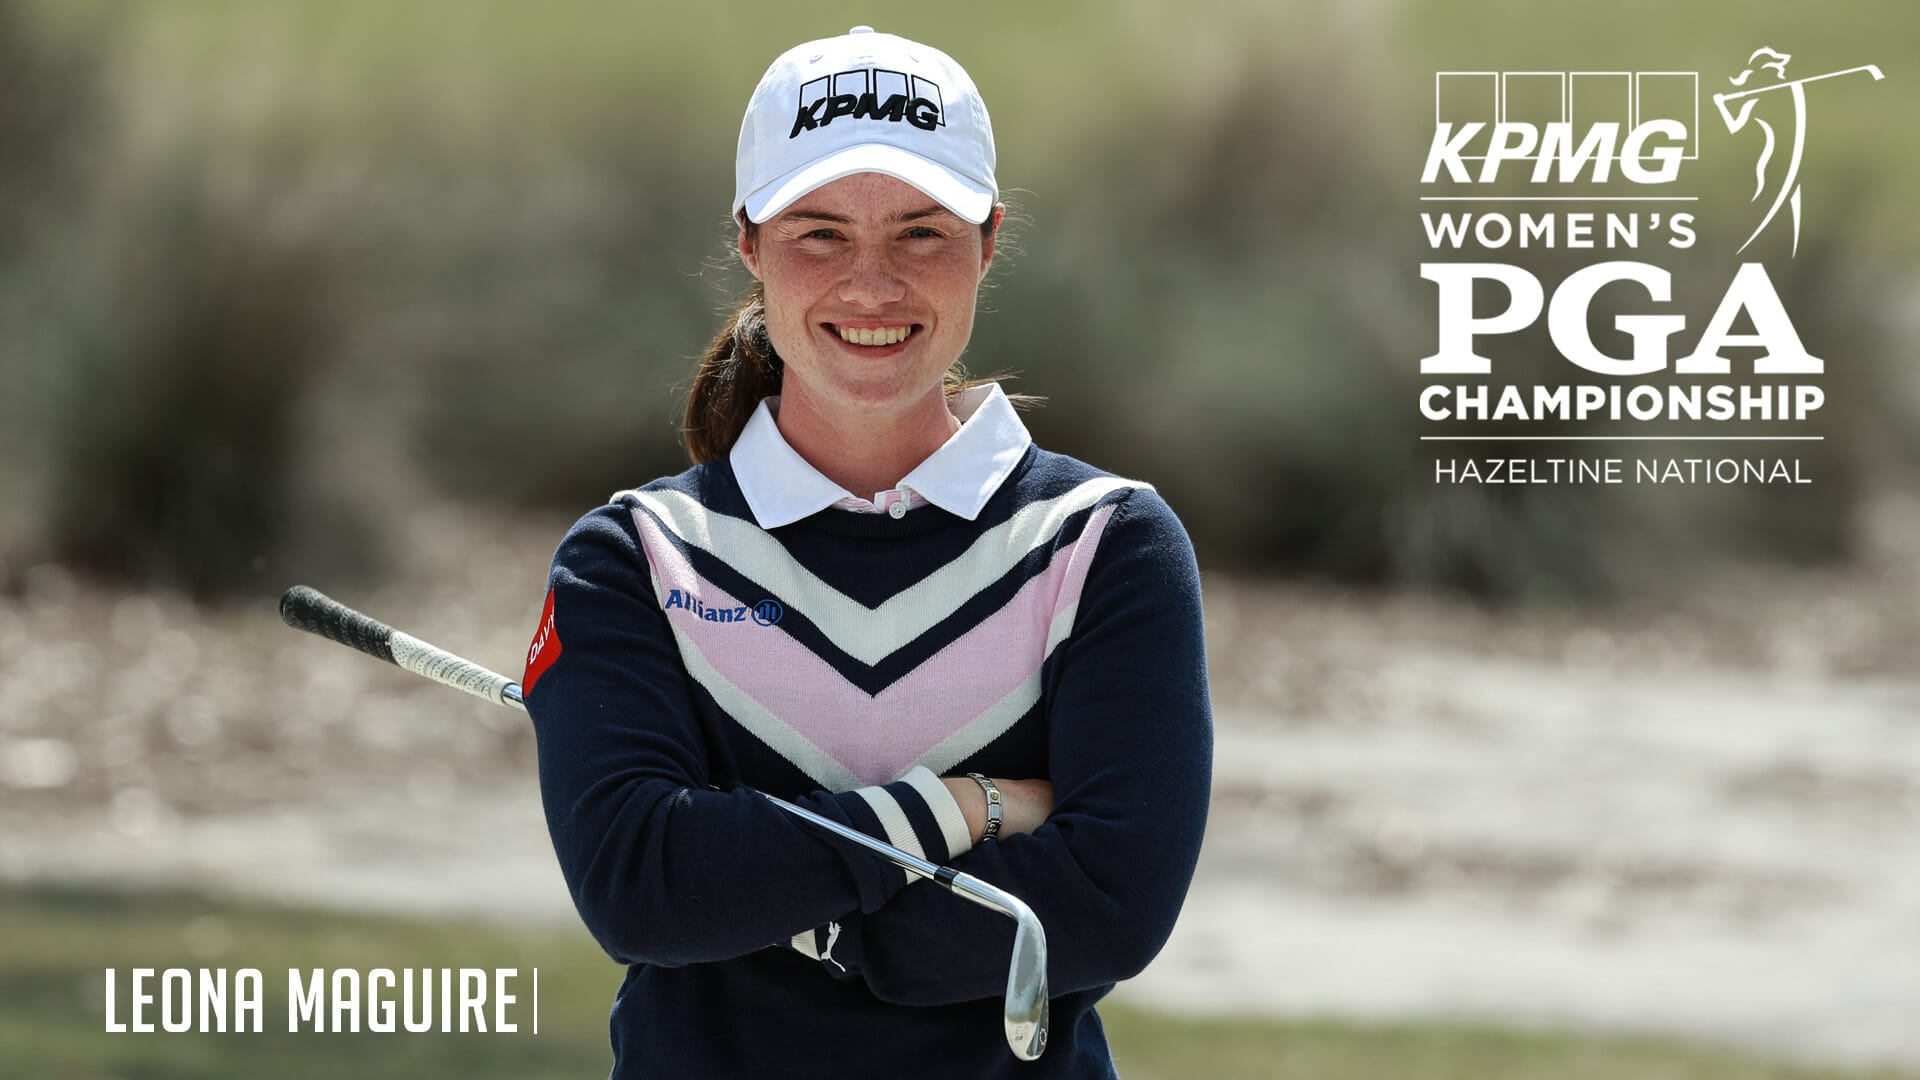 Leona Maguire Accepts Special Exemption to KPMG Women’s PGA Championship